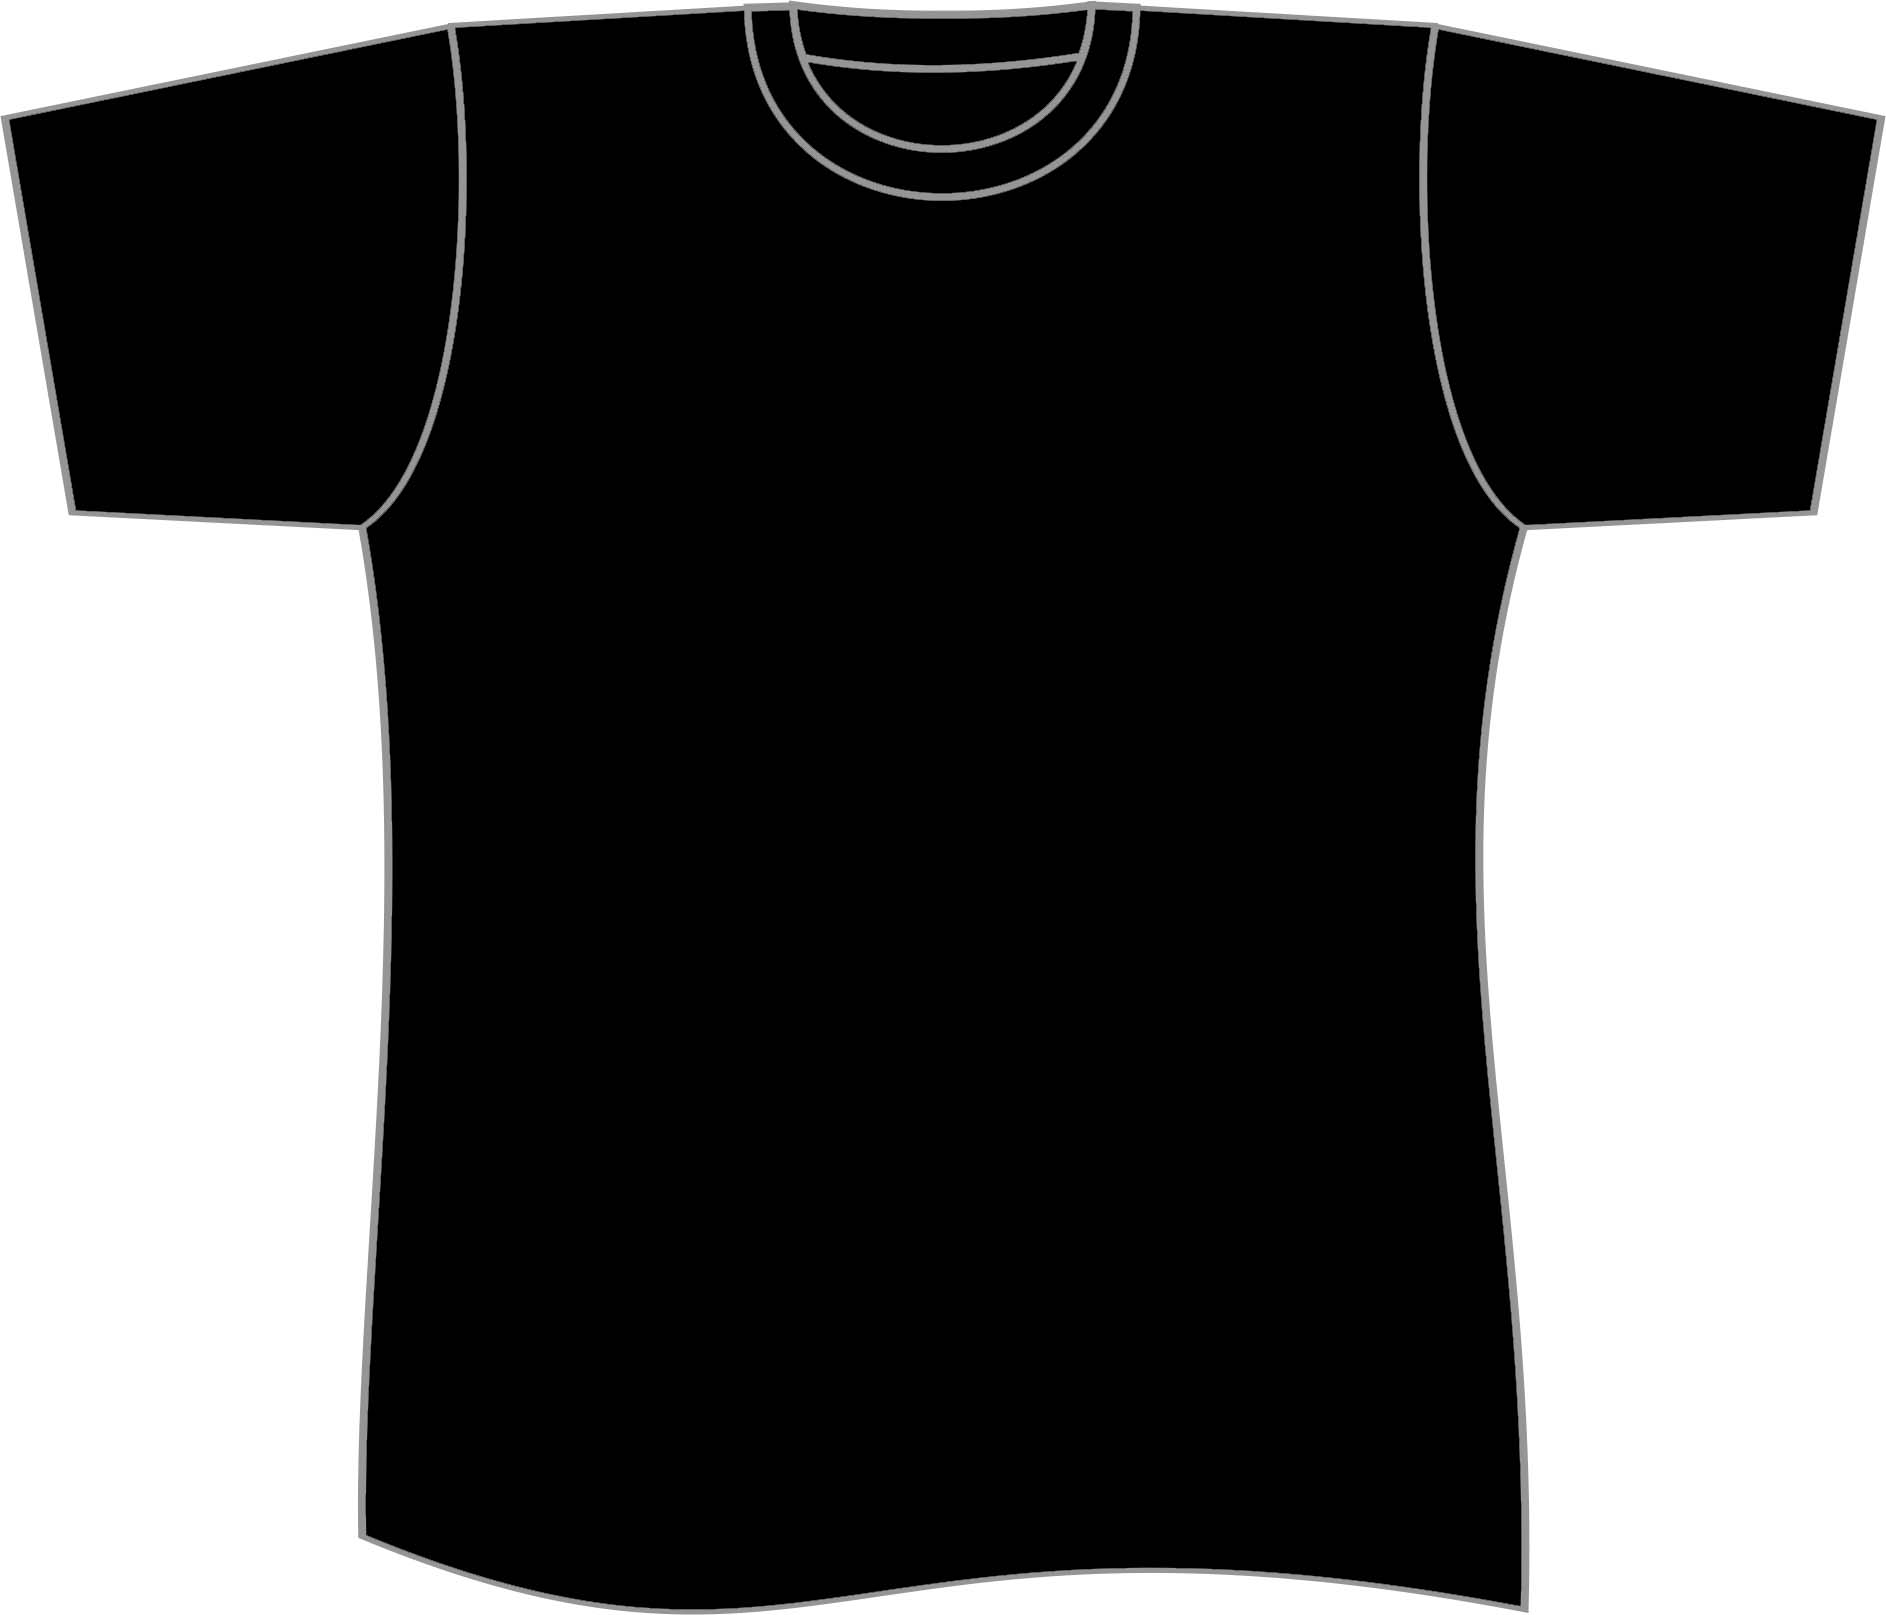 Tshirt Designs Stock Photos Images Pictures Shutterstock ...